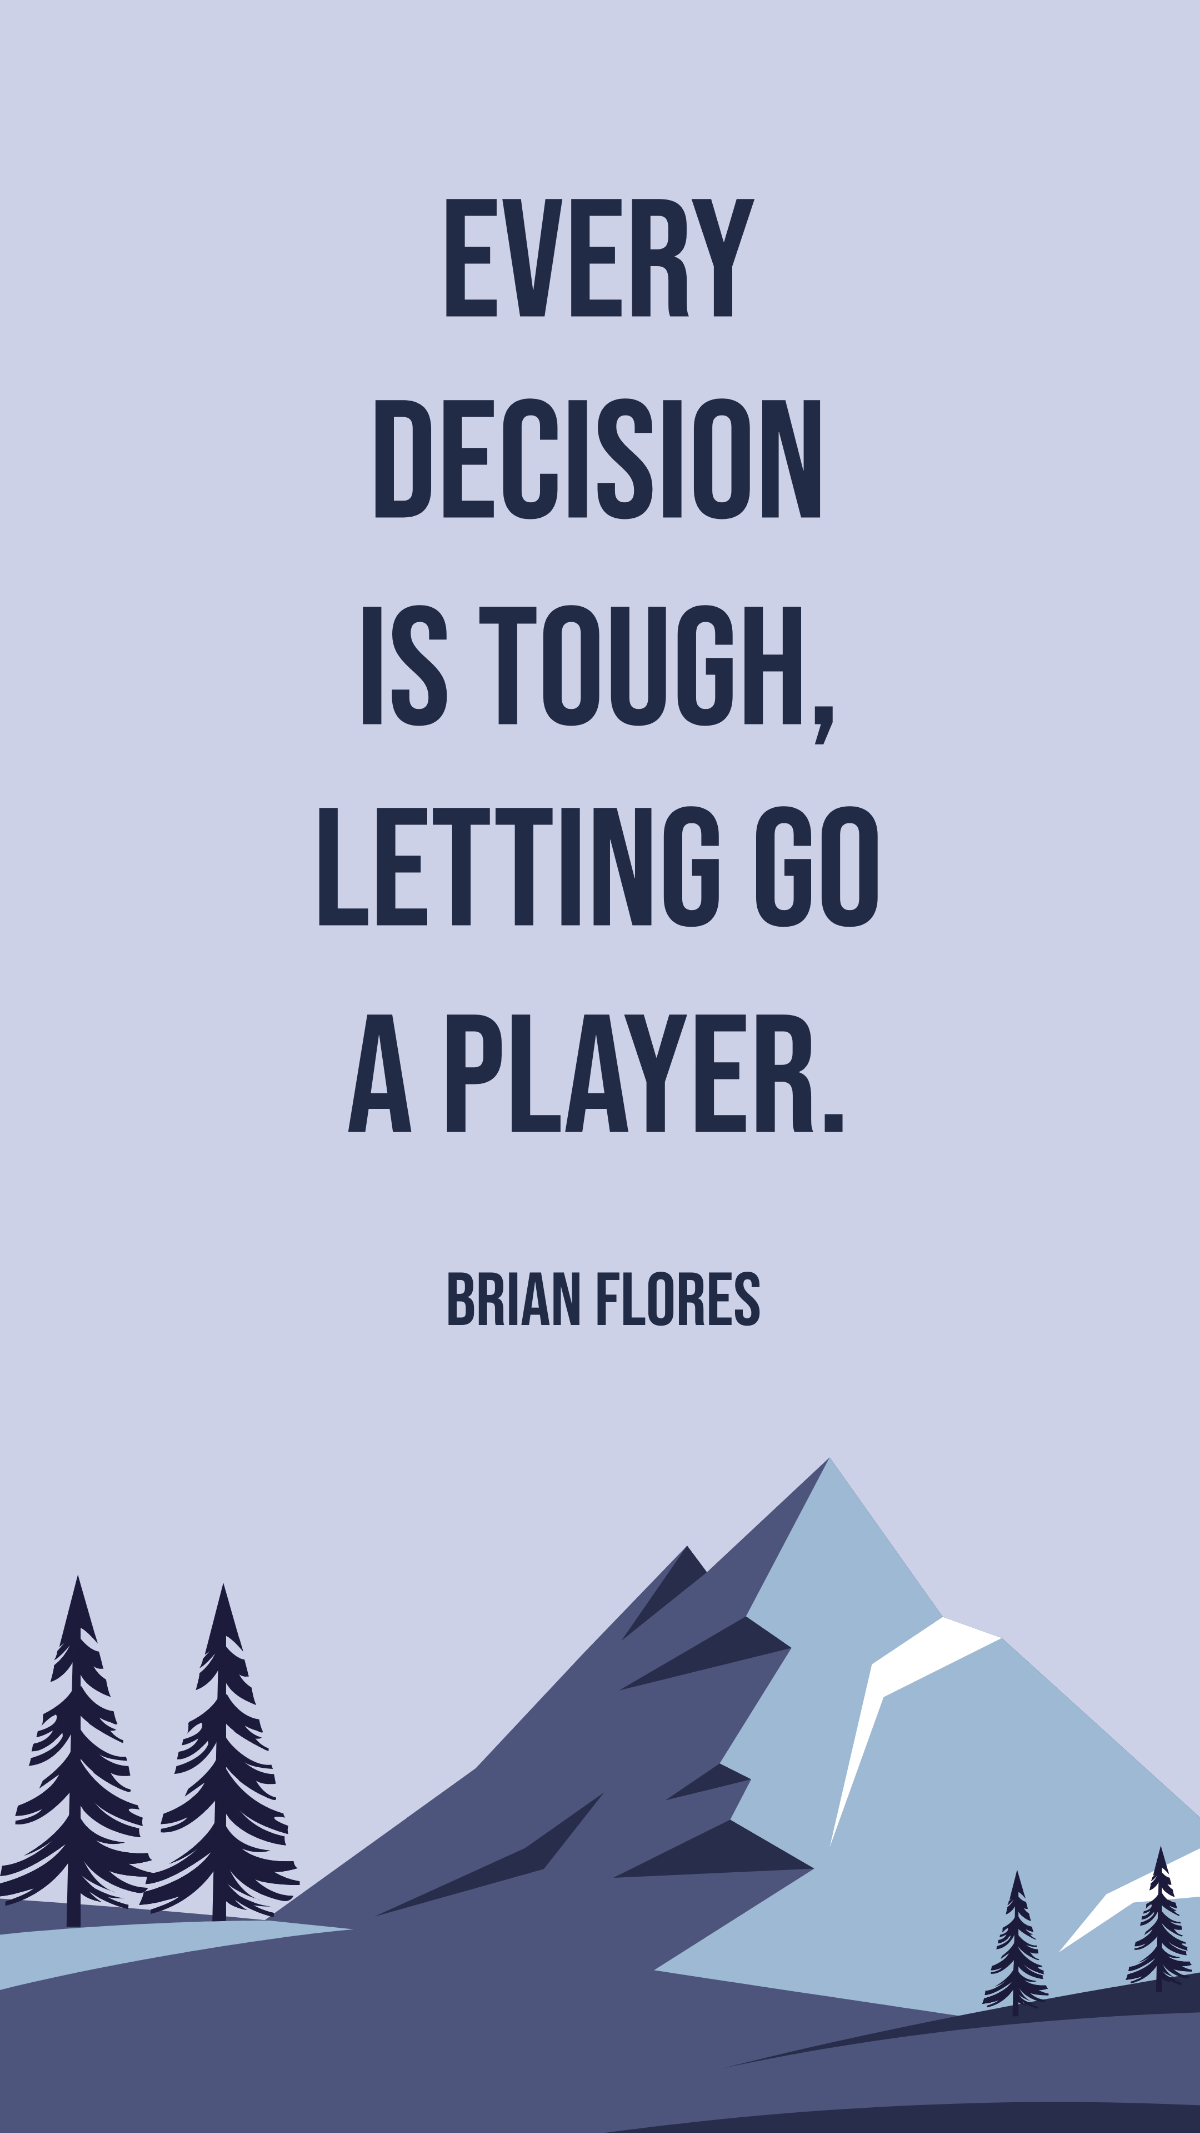 Free Brian Flores -Every decision is tough, letting go a player. Template